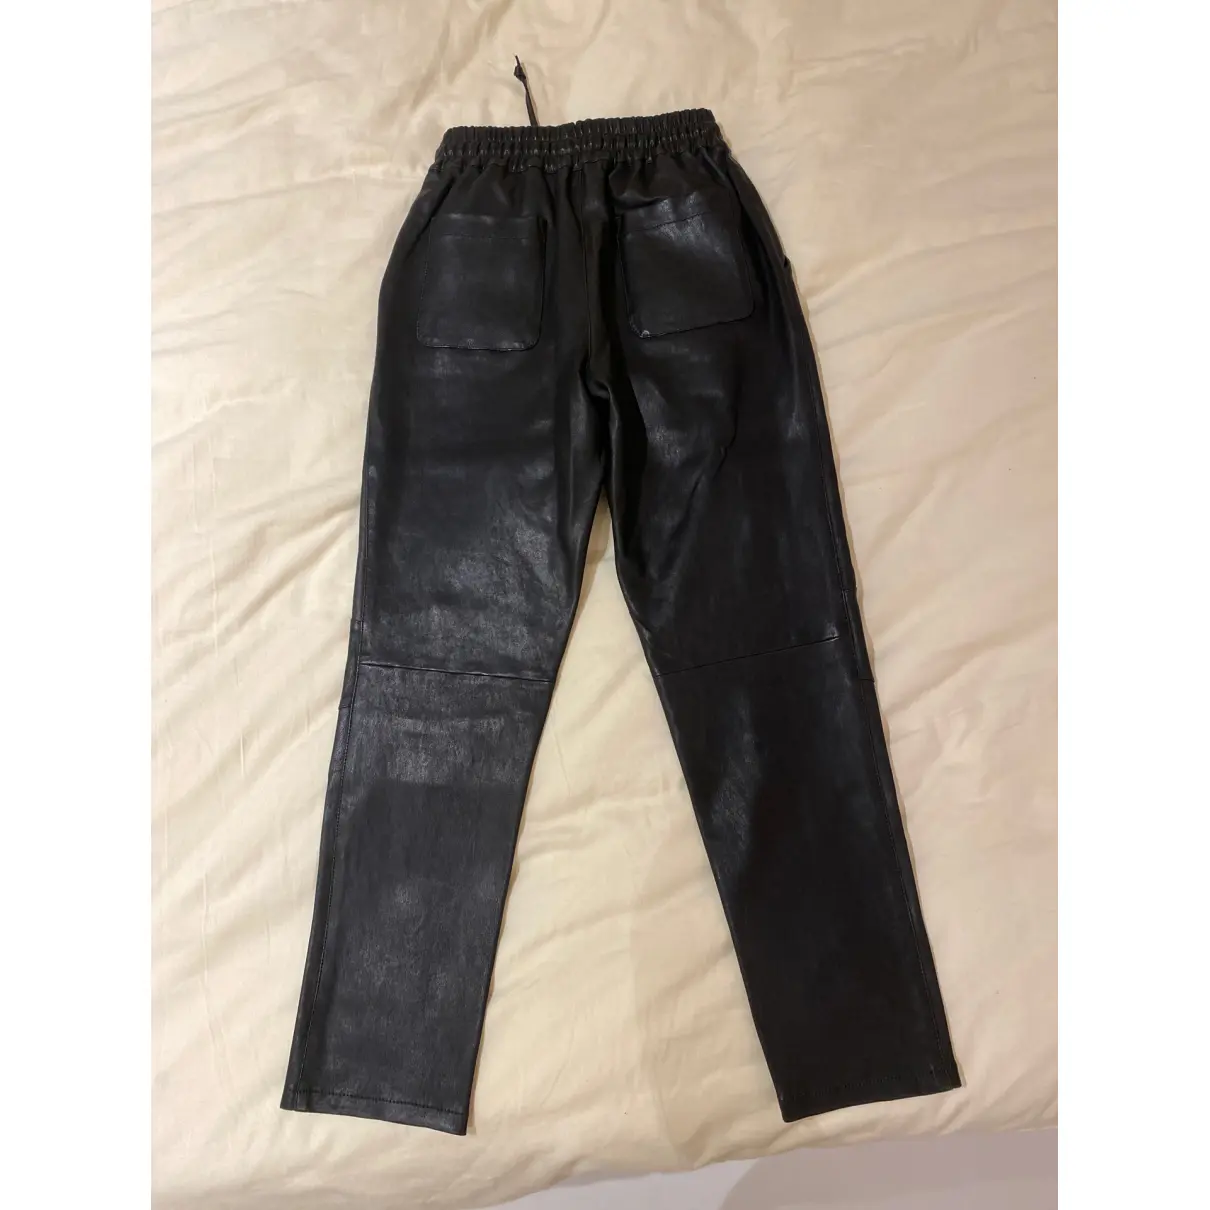 Buy Emporio Armani Leather trousers online